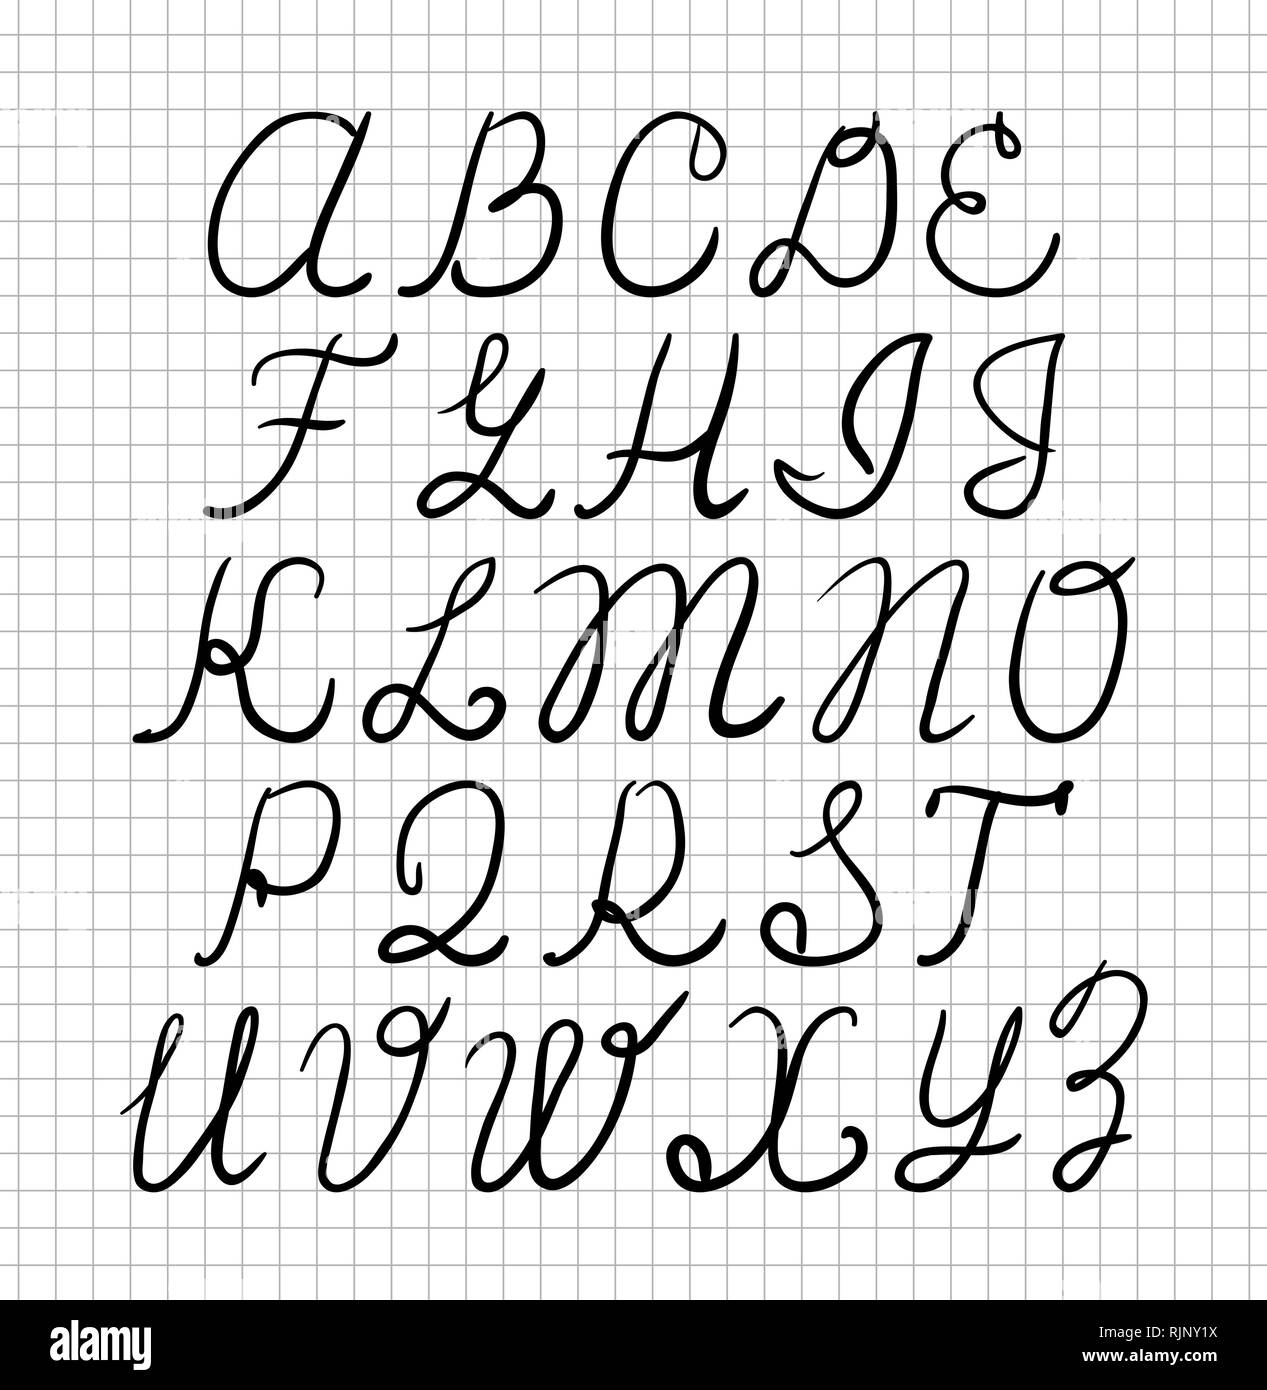 Hand drawn letters. Stylish font ABC in a linear sketch style